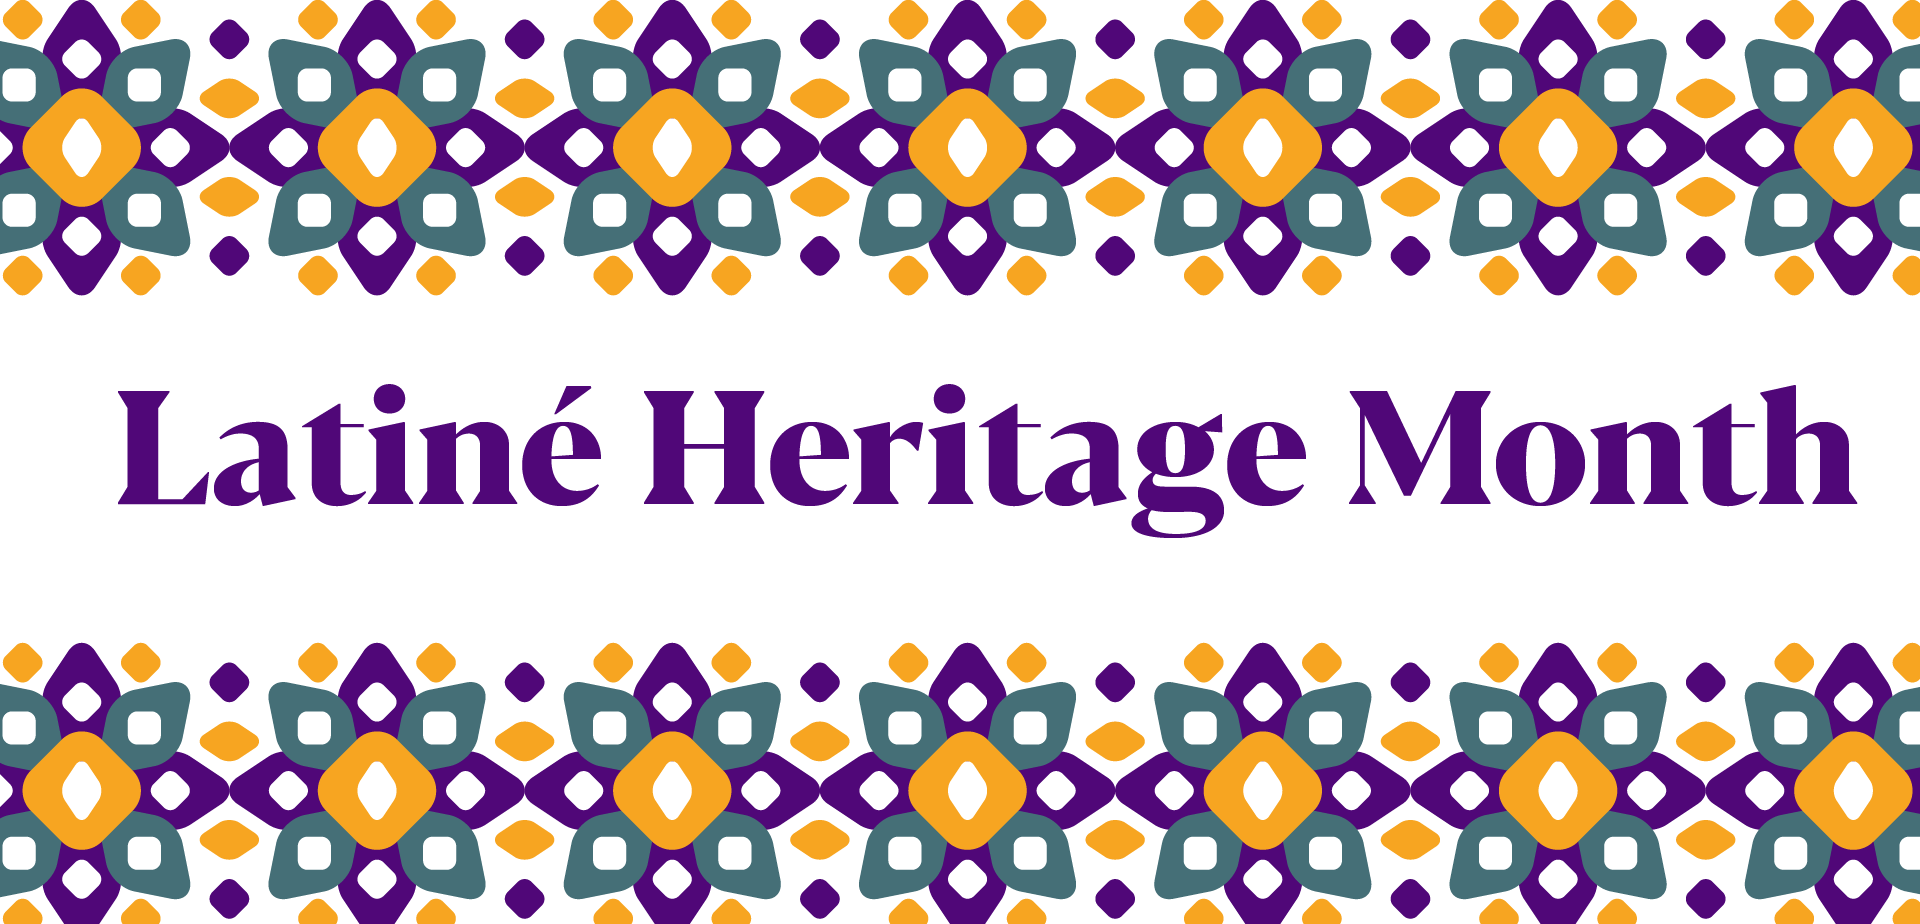 Latiné Heritage Month